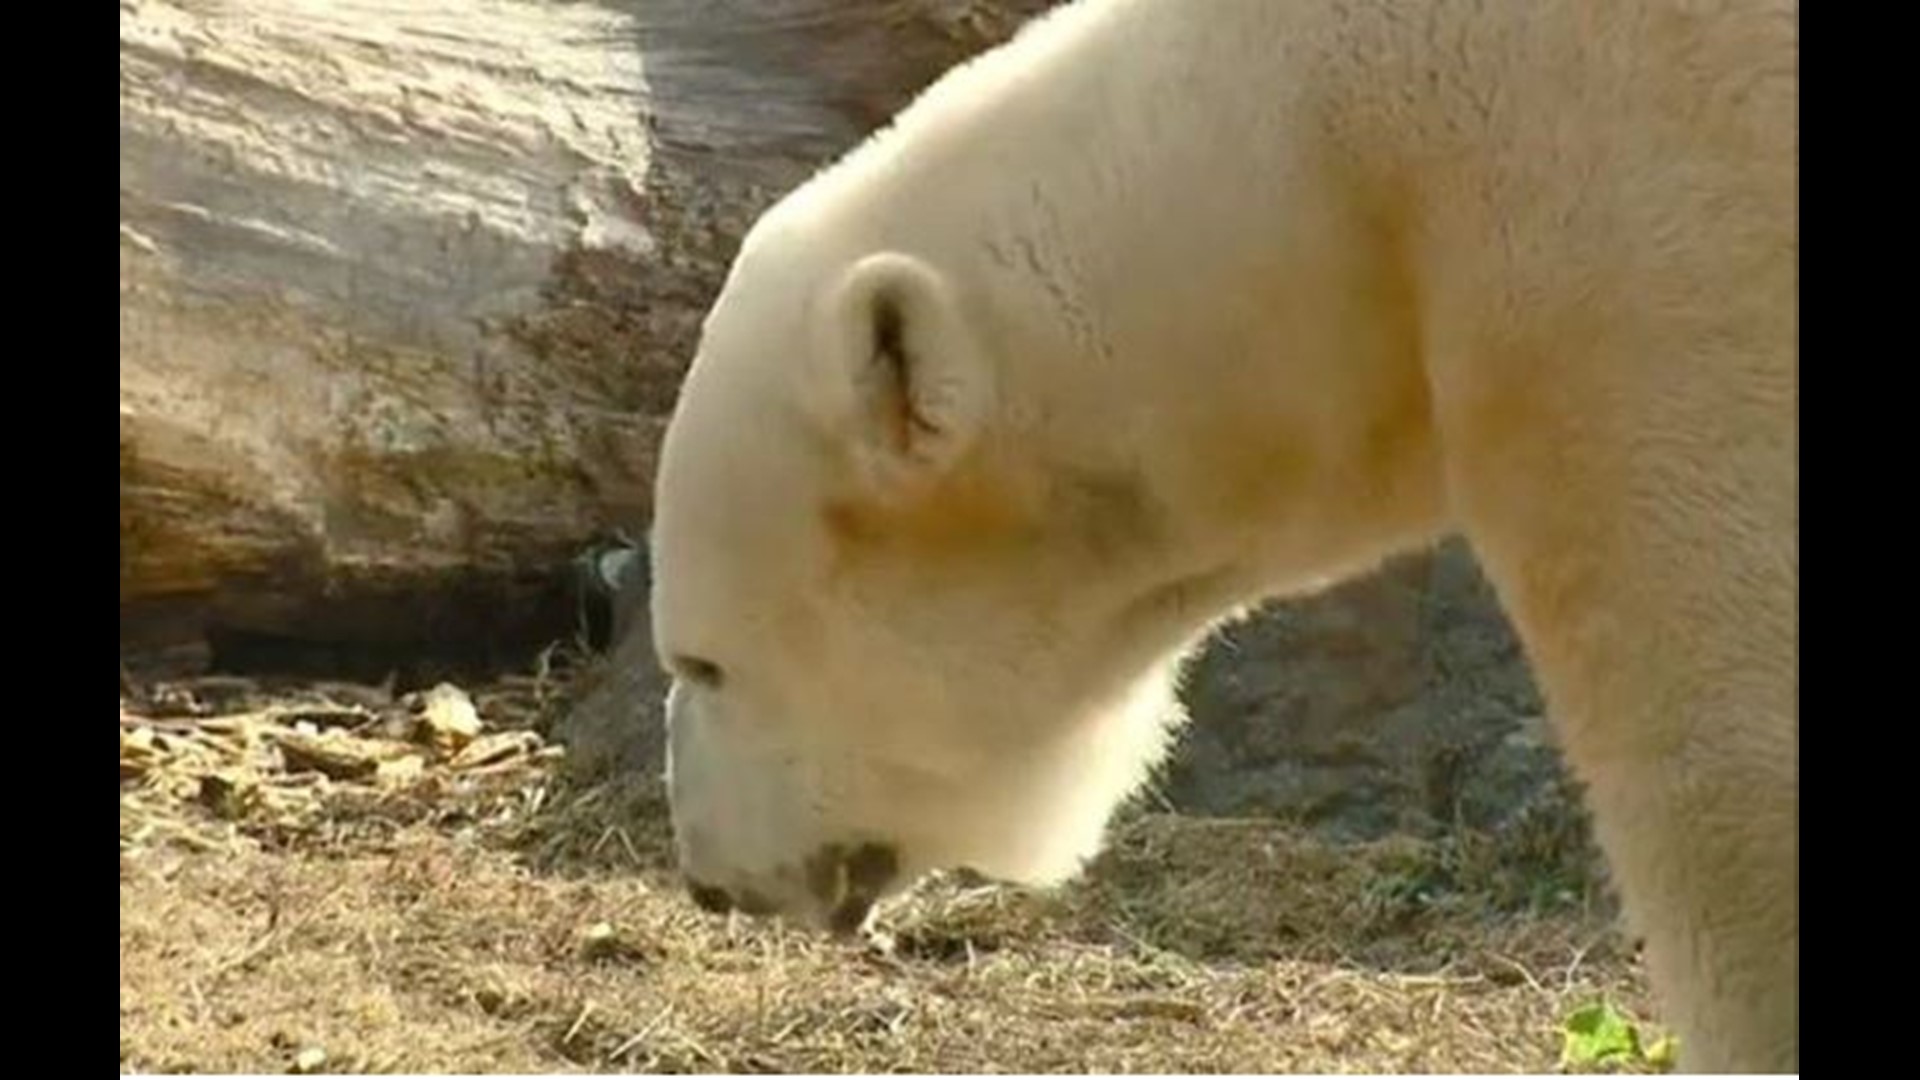 It's dinner time at the NC Zoo! Workers are busy feeding the polar bears during Florence